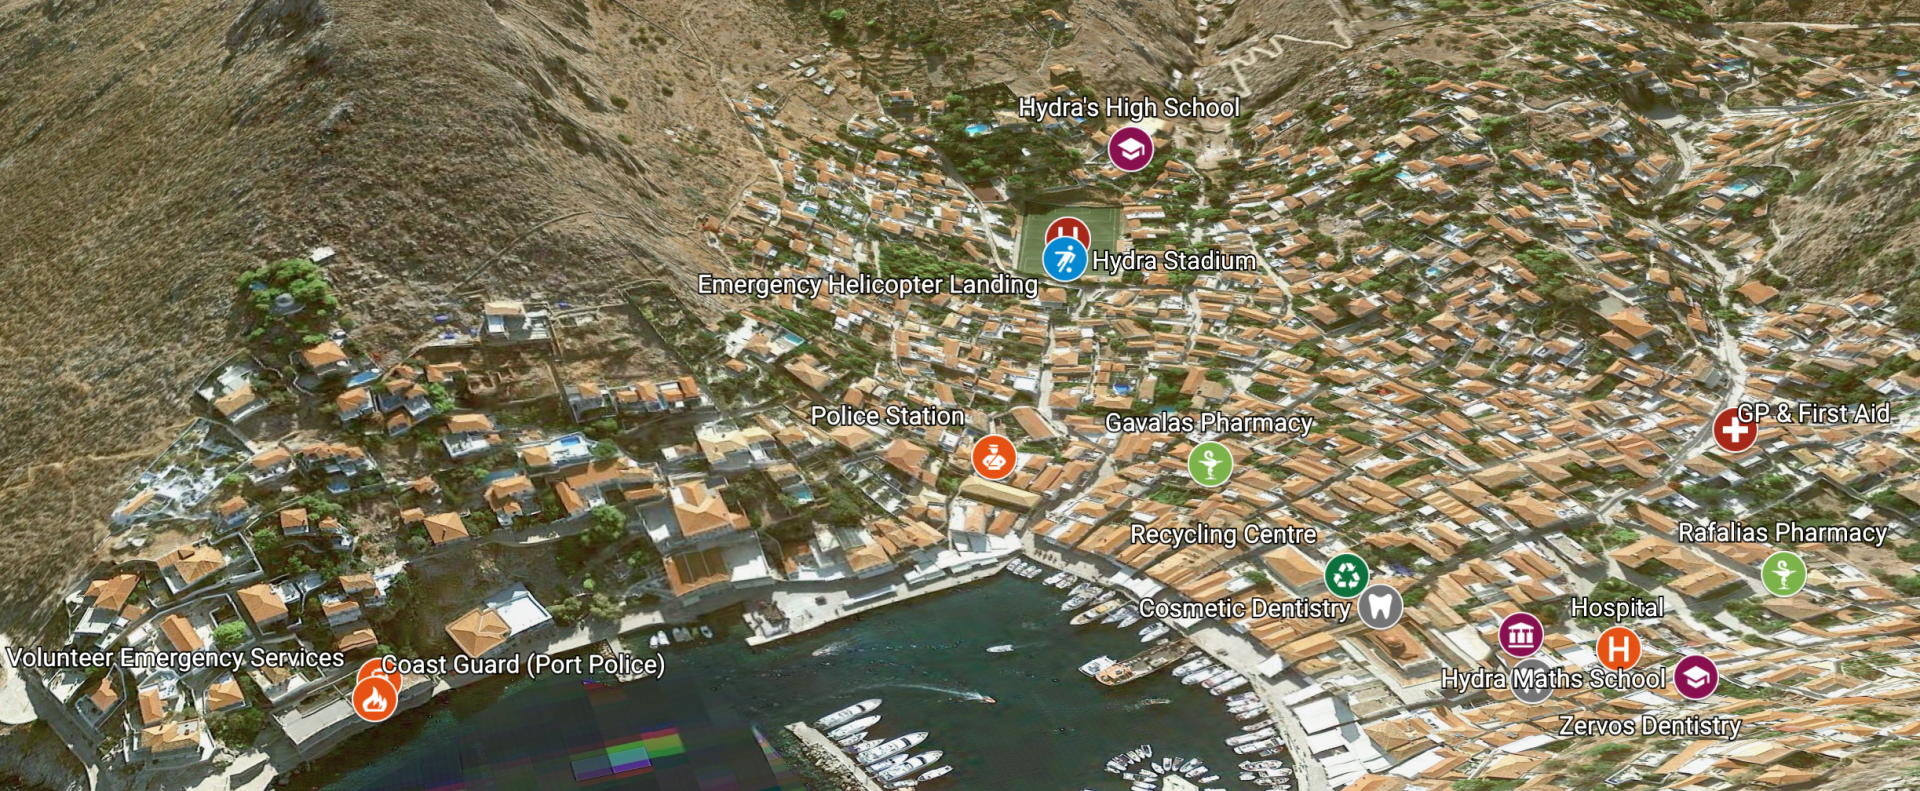 Location map of emergency services for Hydra Island Greece